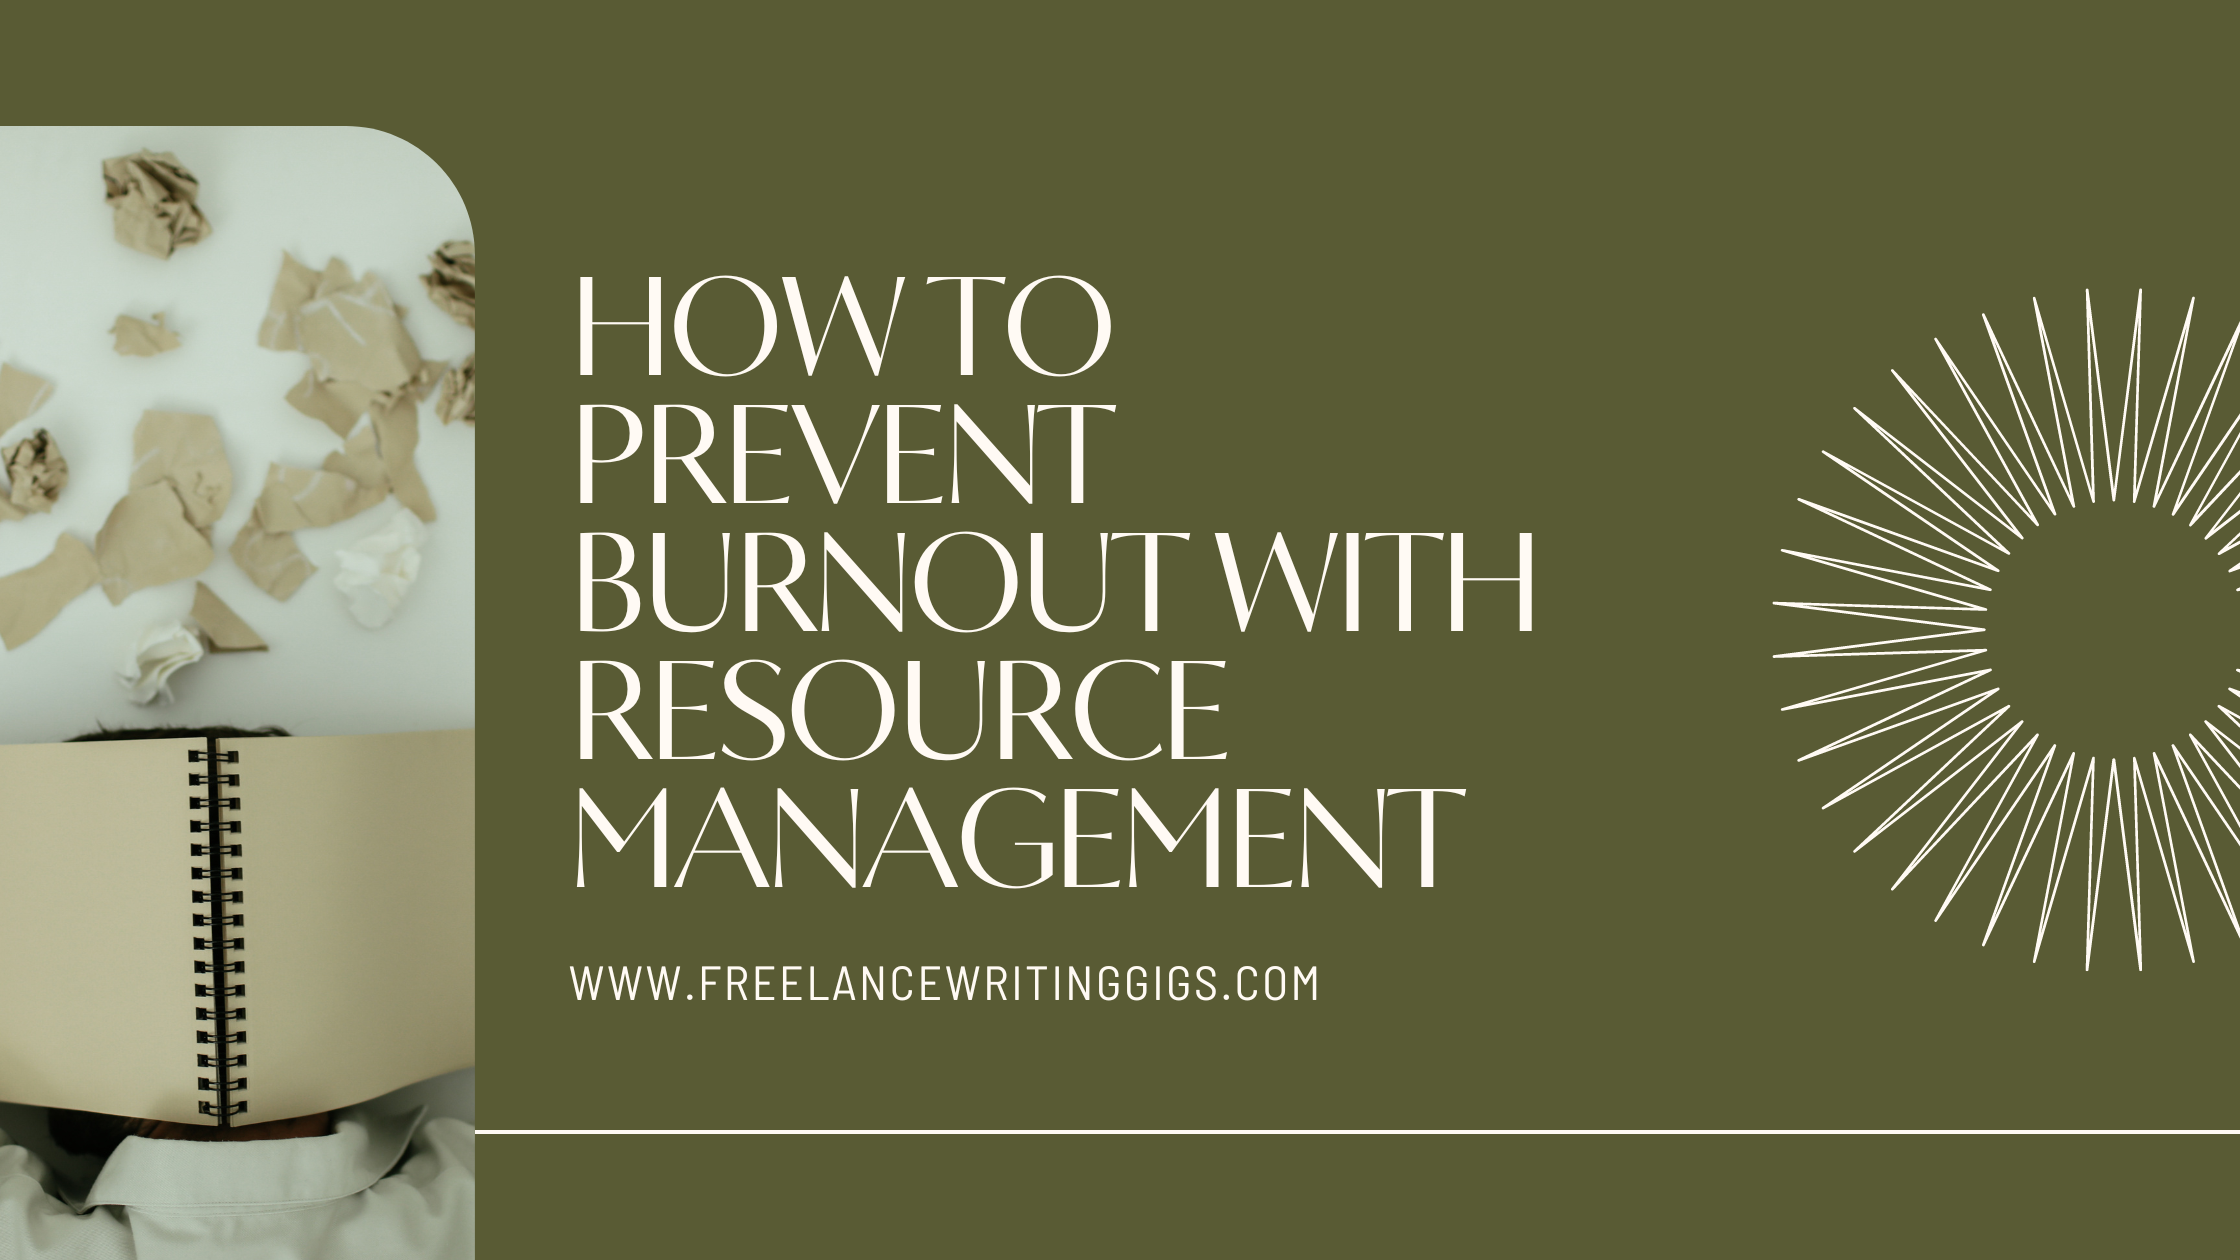 What Is Resource Management and How Can You Use It to Prevent Burnout?